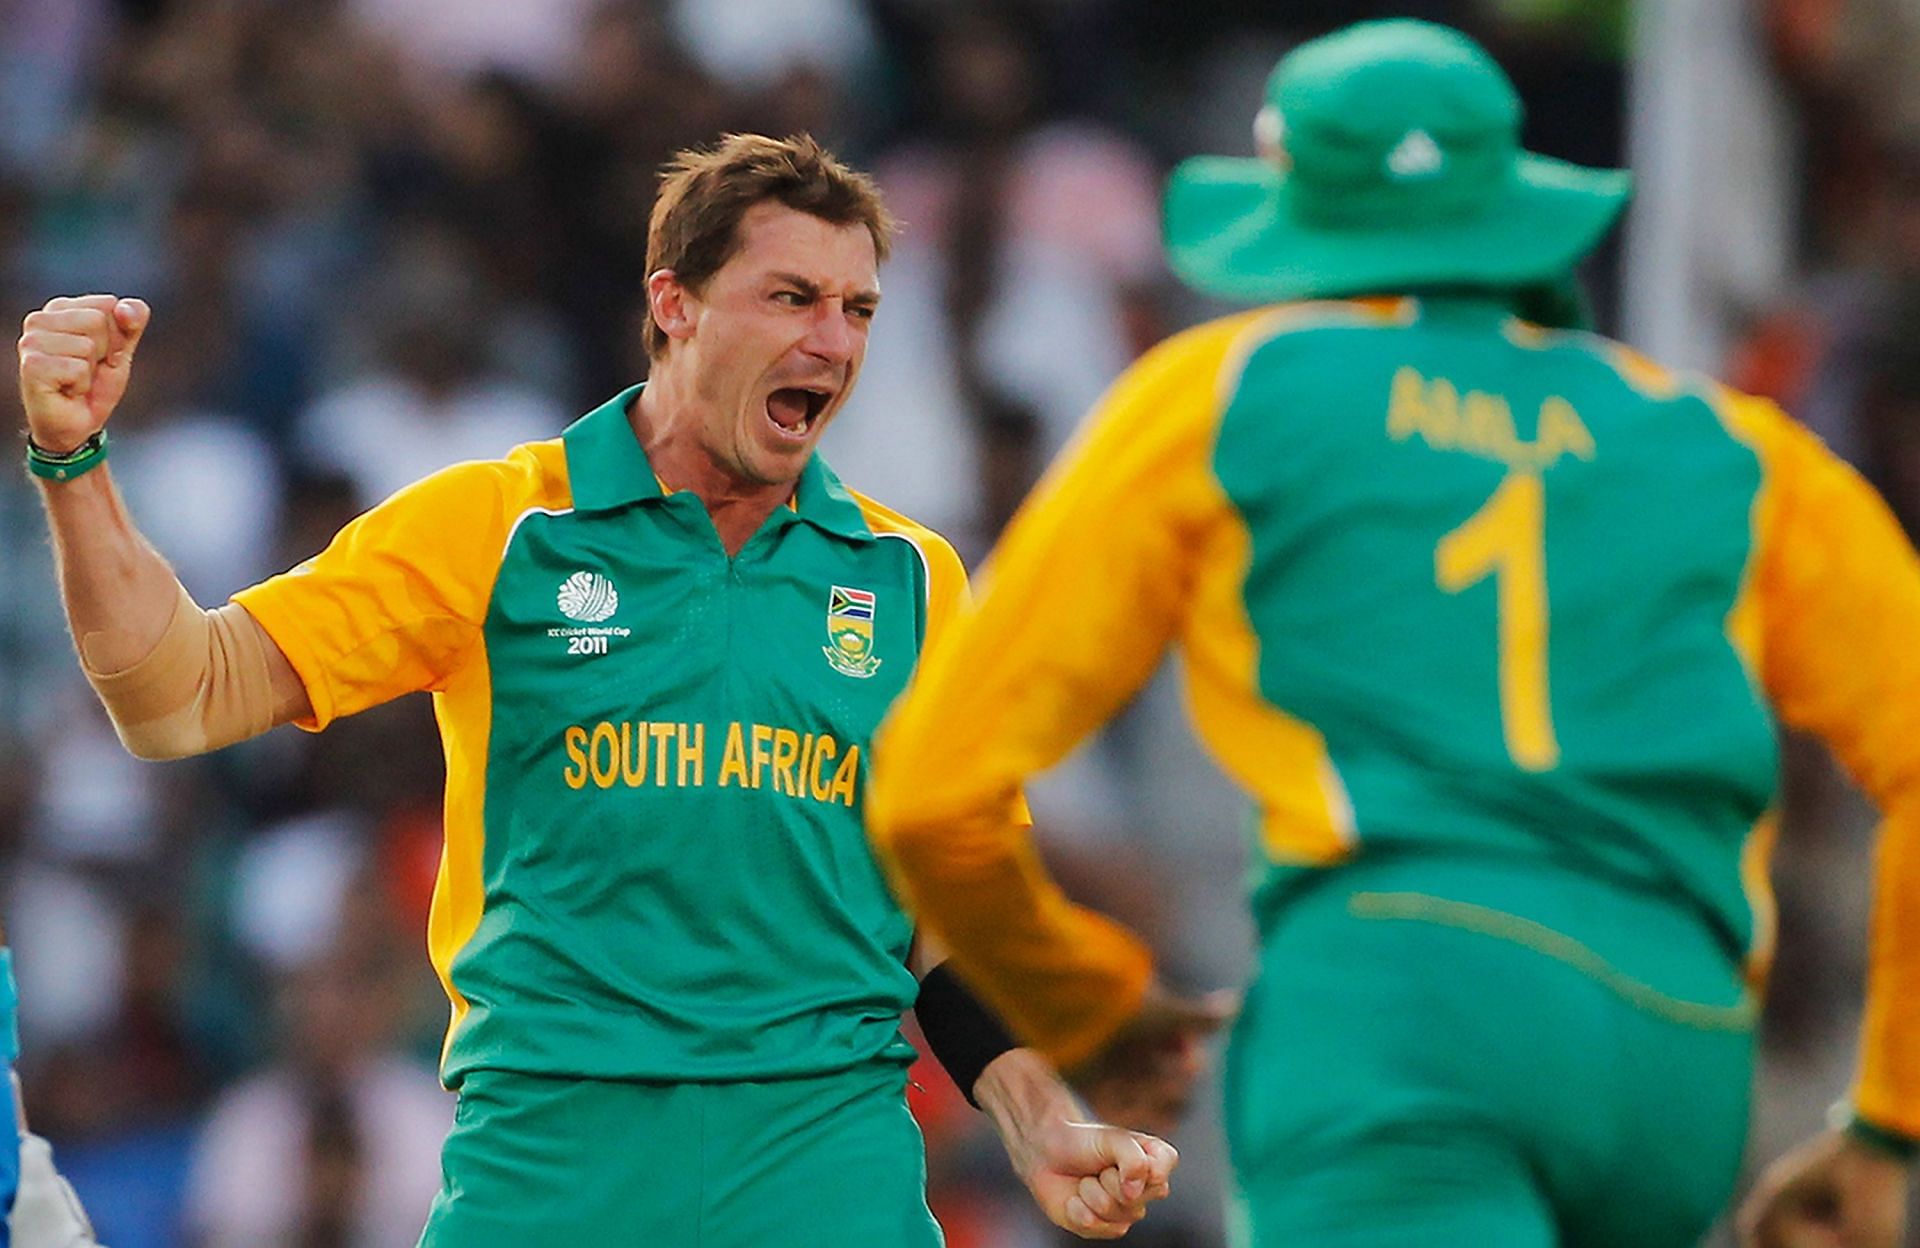 Dale Steyn celebrates the wicket of Yusuf Pathan. (Pic: Getty Images)